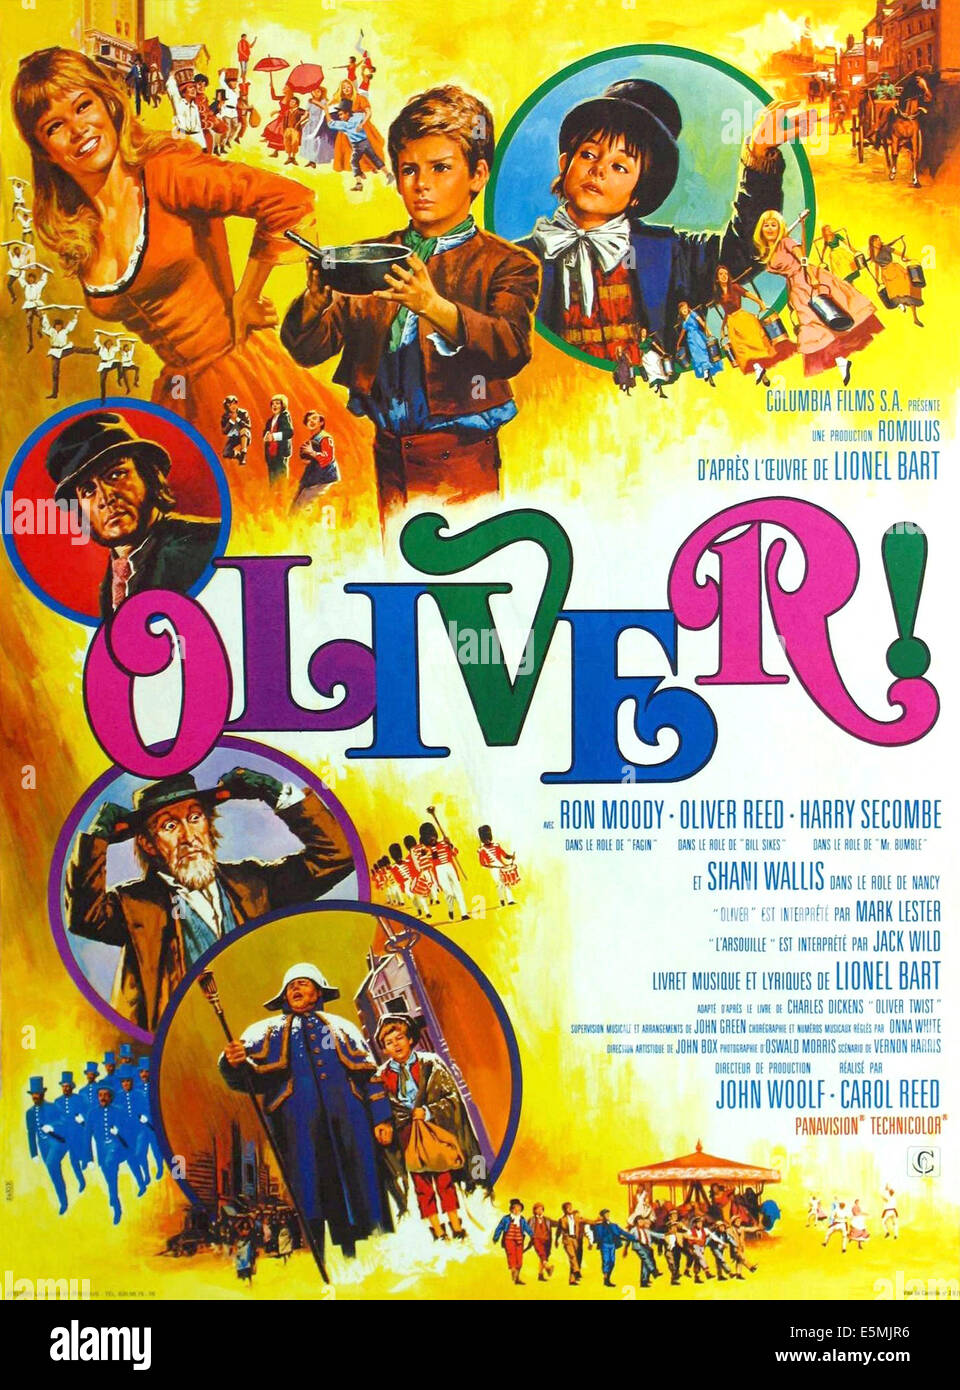 OLIVER!, top l-r: Shani Wallis, Mark Lester, Jack Wild, center: Oliver Reed, bottom from top: Ron Moody, Harry Secombe, Mark Stock Photo